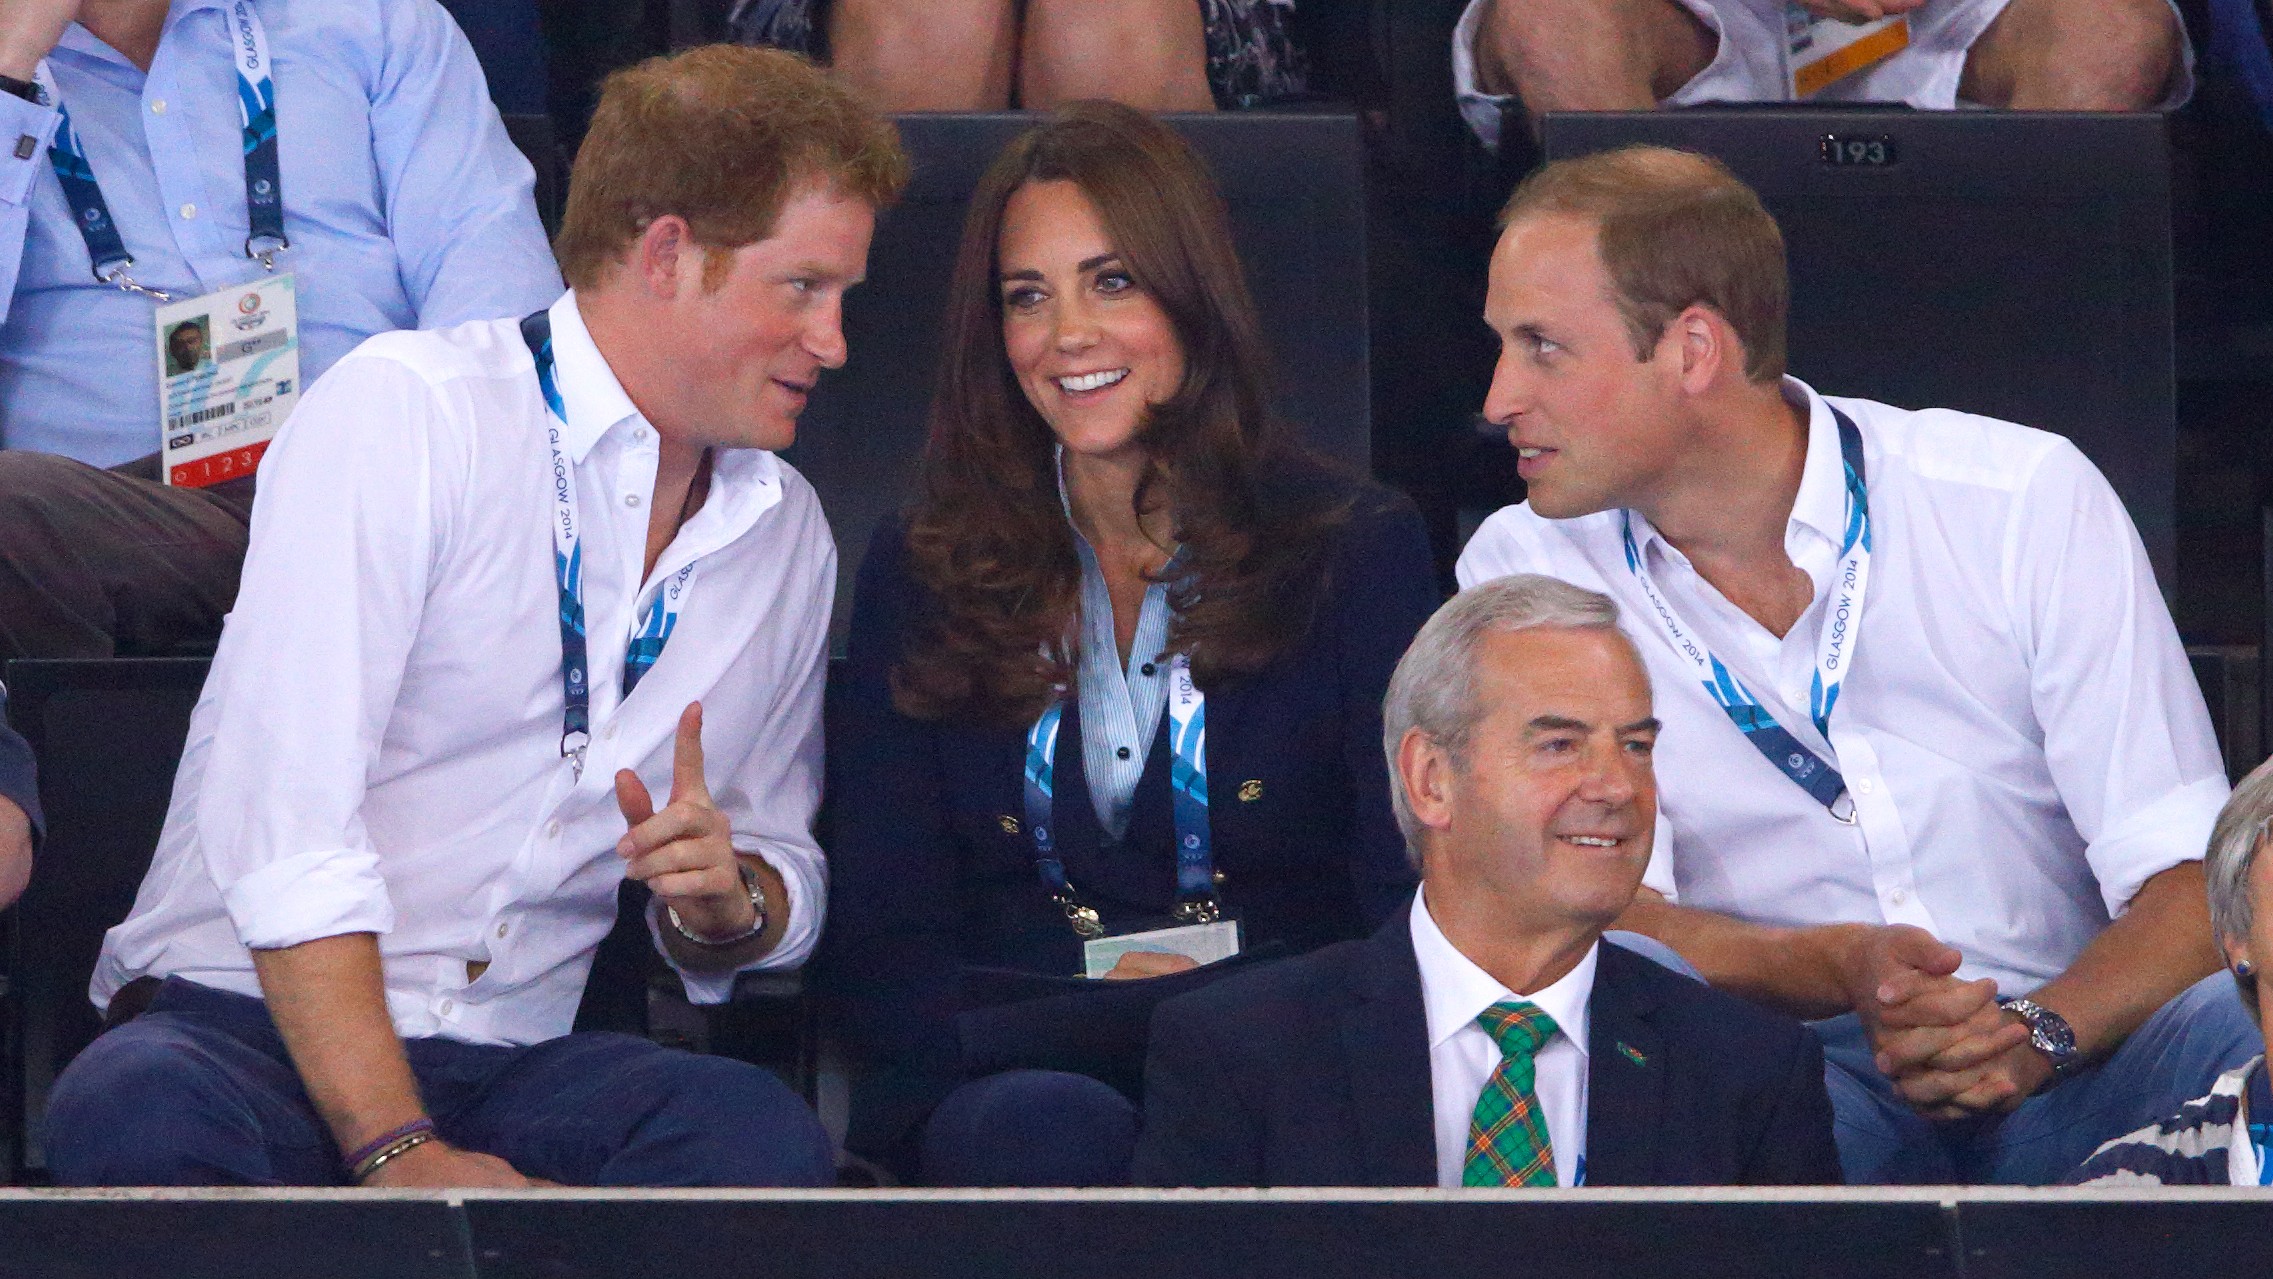 Body Language Expert Analyzes Prince William and Prince Harry's “Closeness”  at Past Commonwealth Games | Marie Claire